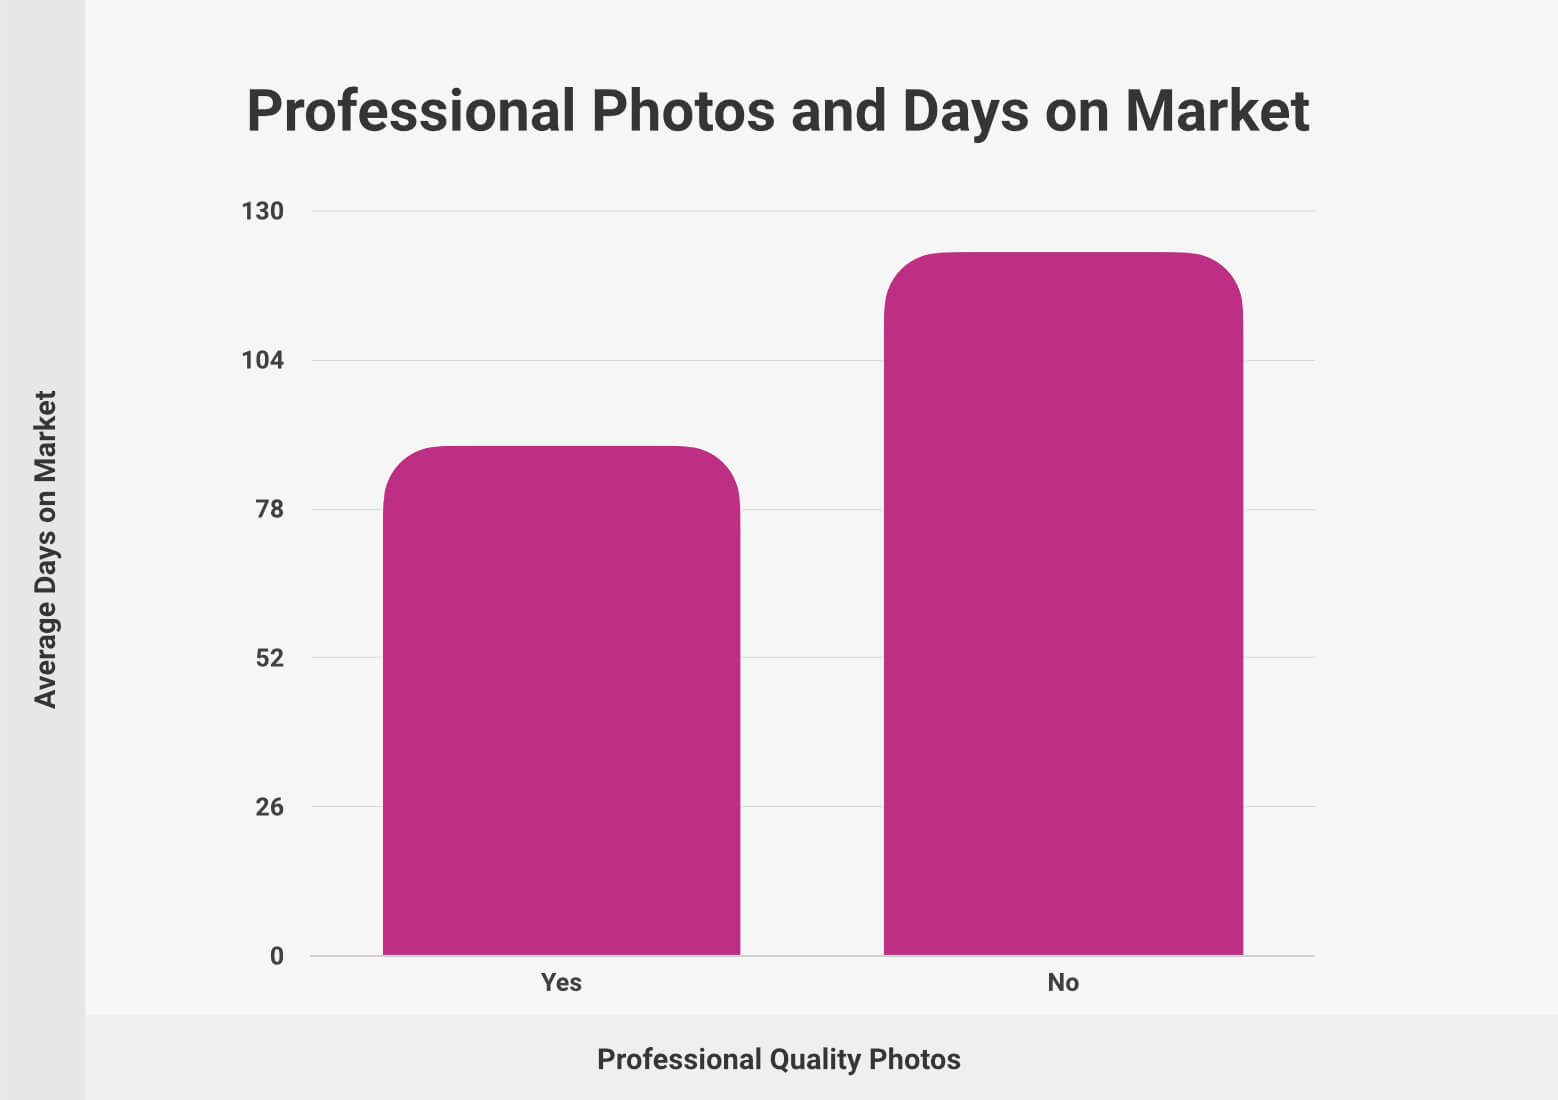 Professional Photos and Days on Market